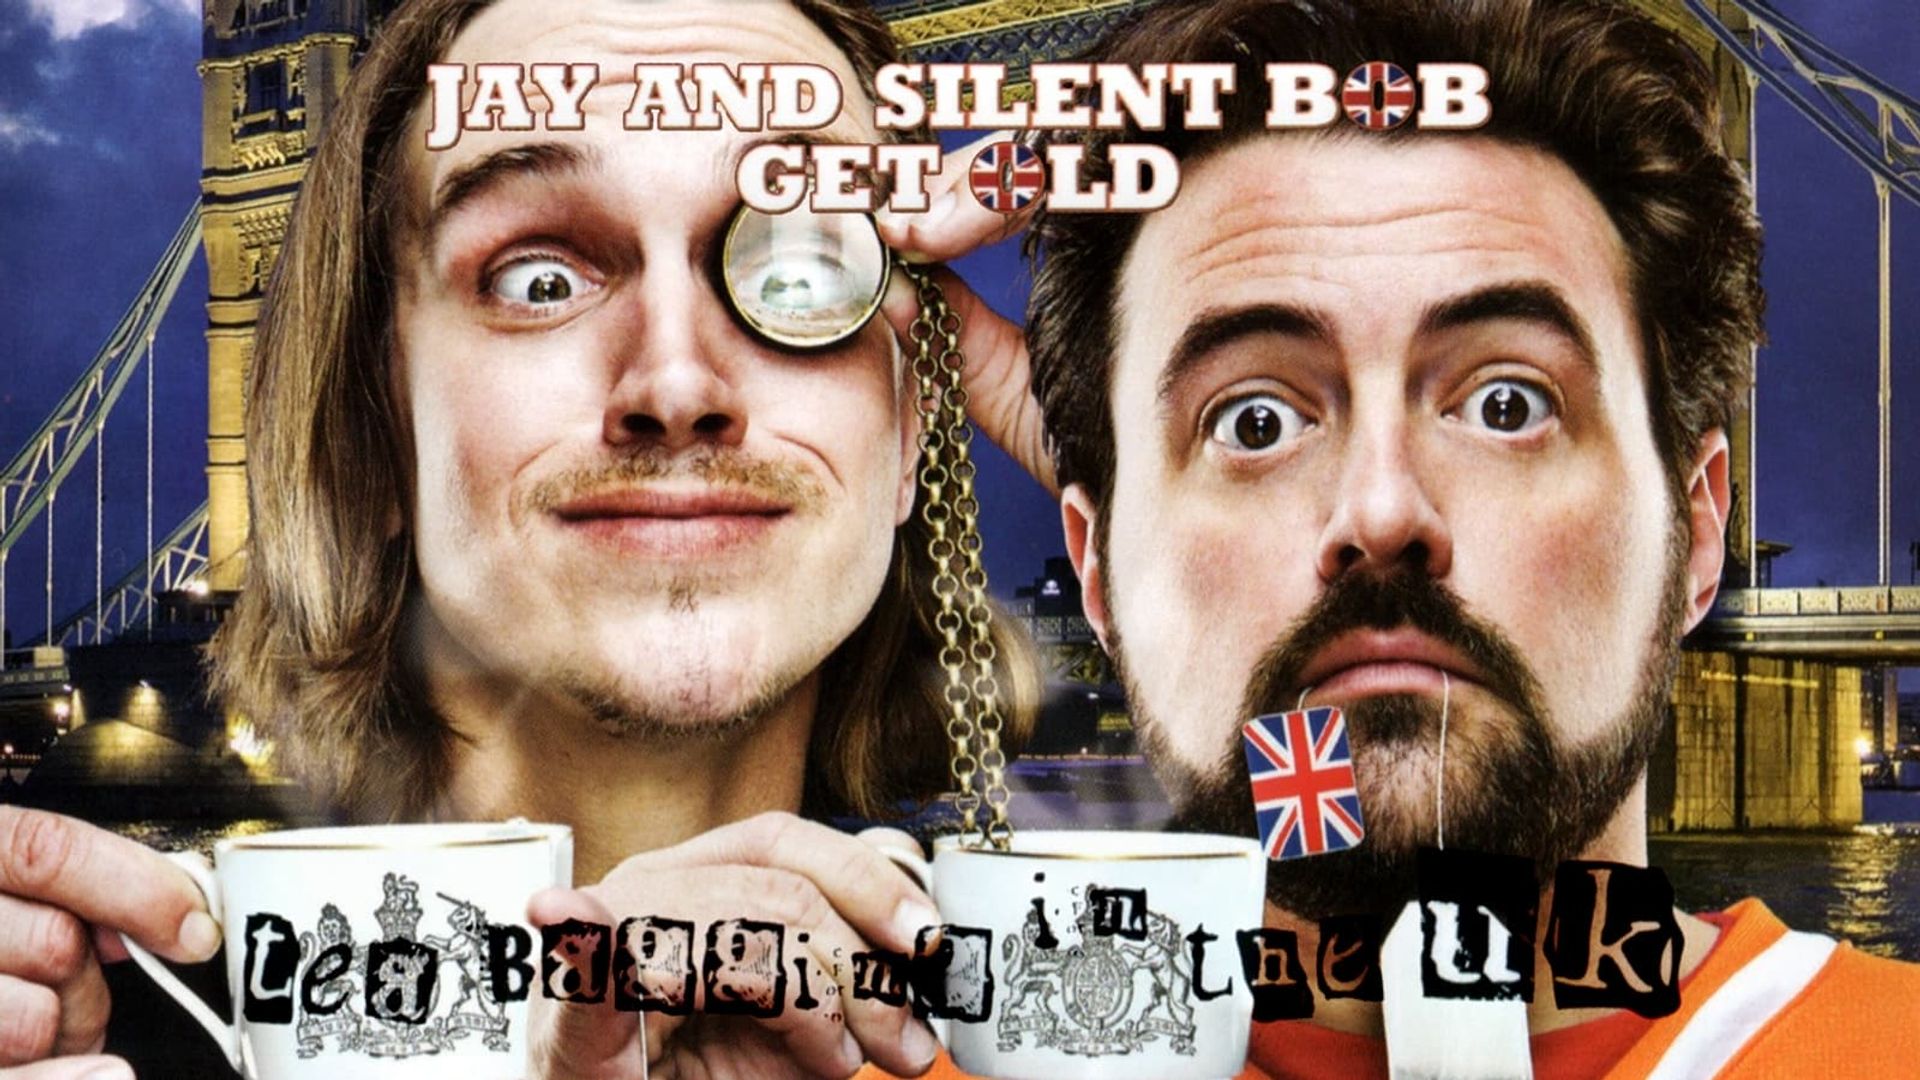 Jay and Silent Bob Get Old: Tea Bagging in the UK background